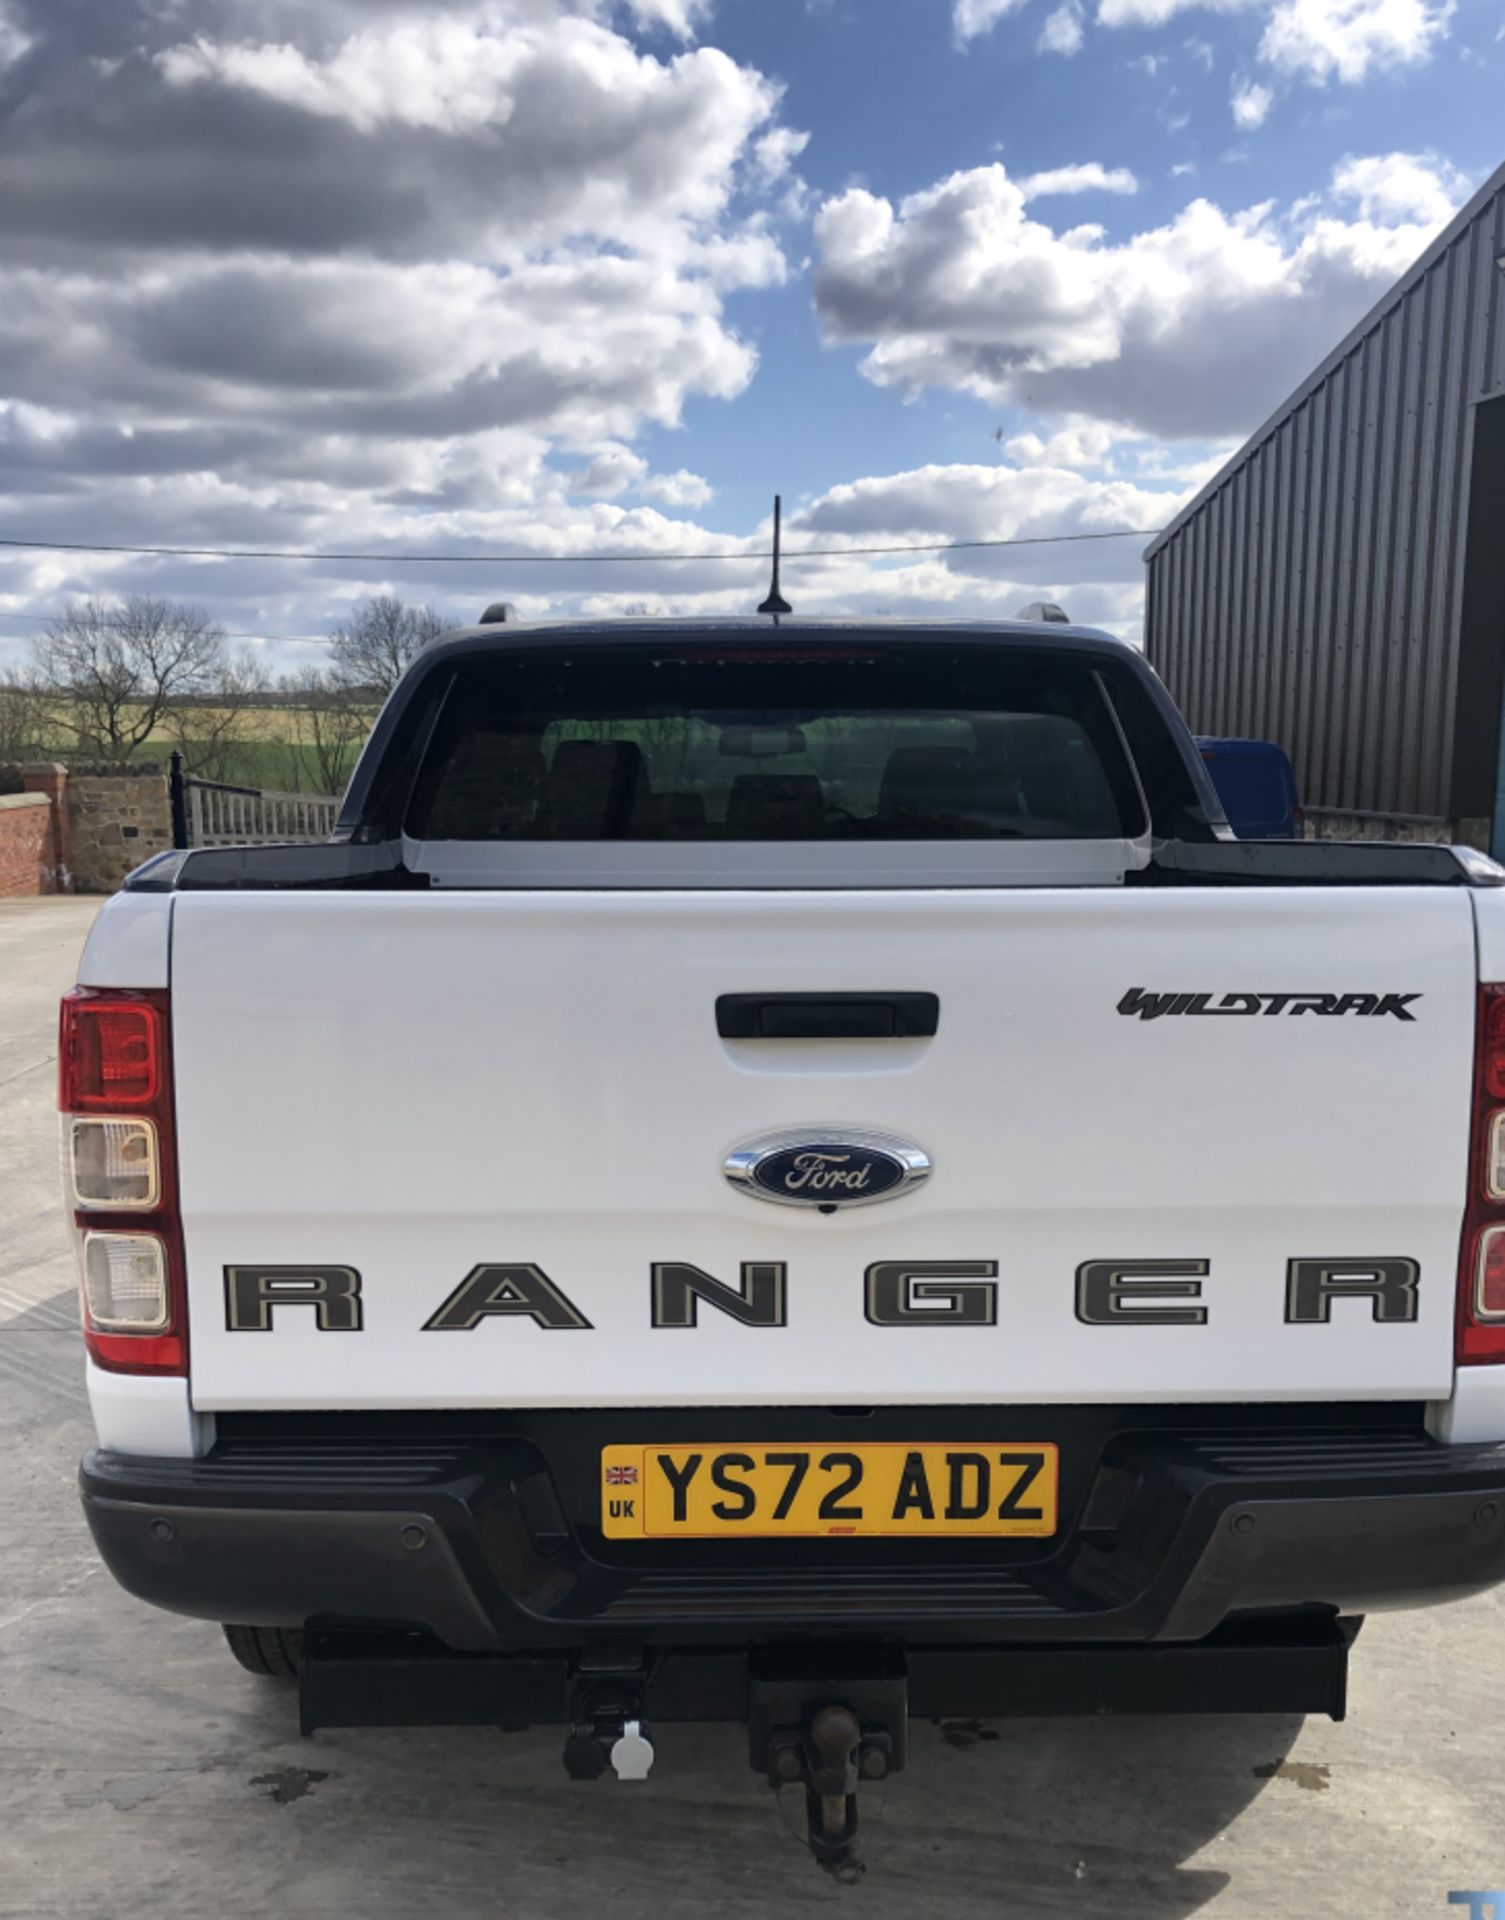 2022 FORD RANGER WILD TRACK DOUBLE CAB PICKUP - ONLY 8K MILES!!!! GRAB A BARGAIN!!! - Image 4 of 8